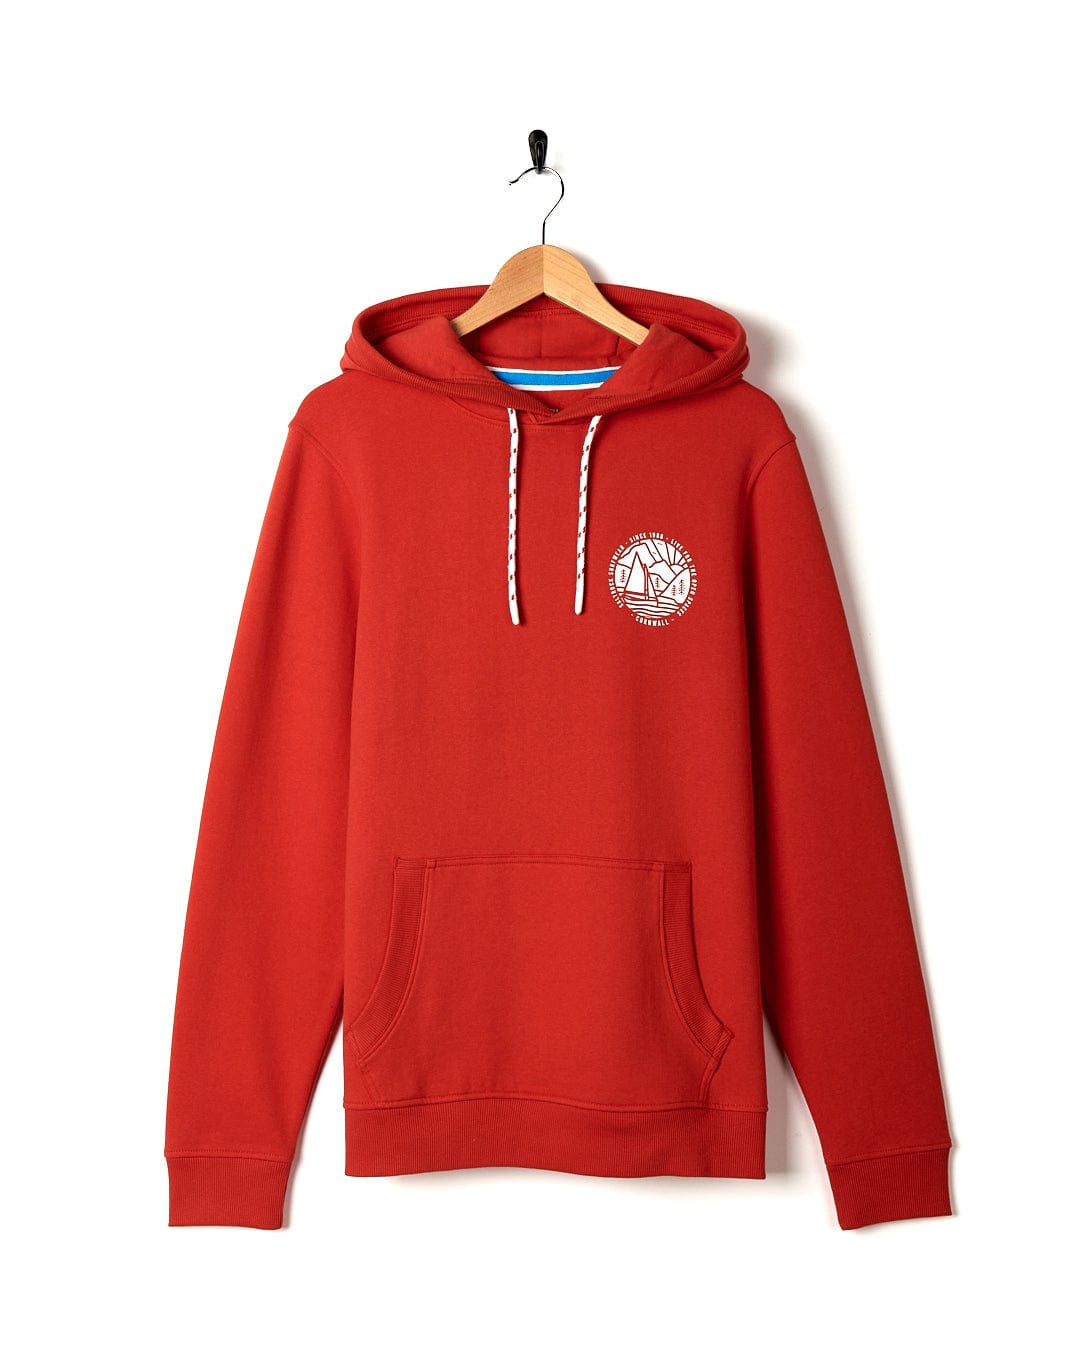 A Cornwall Sailaway - Mens Pop Hoodie - Red with a Saltrock logo on it.